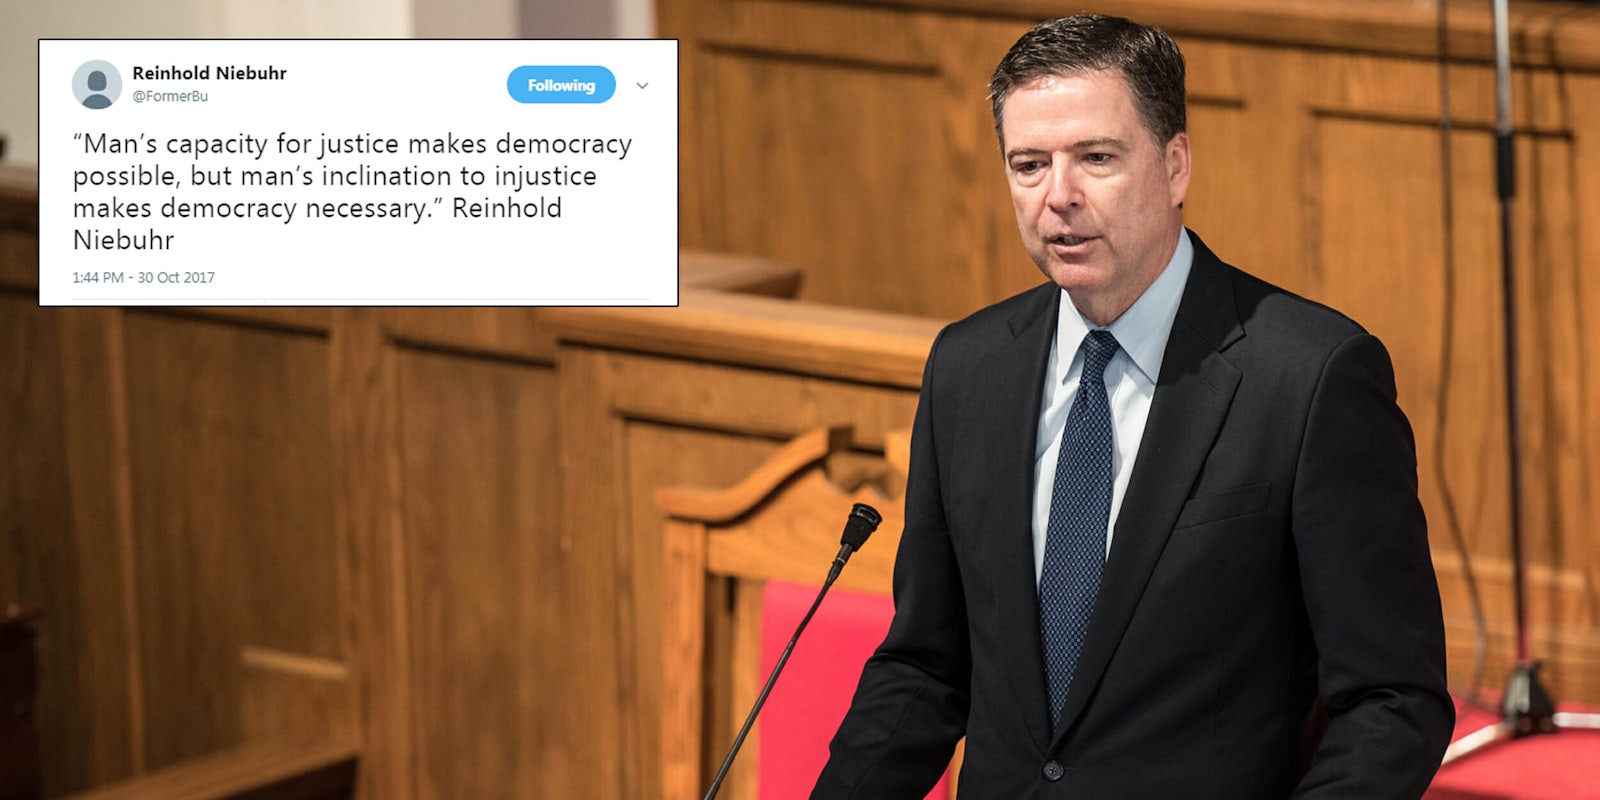 Former FBI Director James Comey sent out a cryptic tweet, that seems awfully like a subtweet, shortly after Robert Mueller announced indictments on Monday.